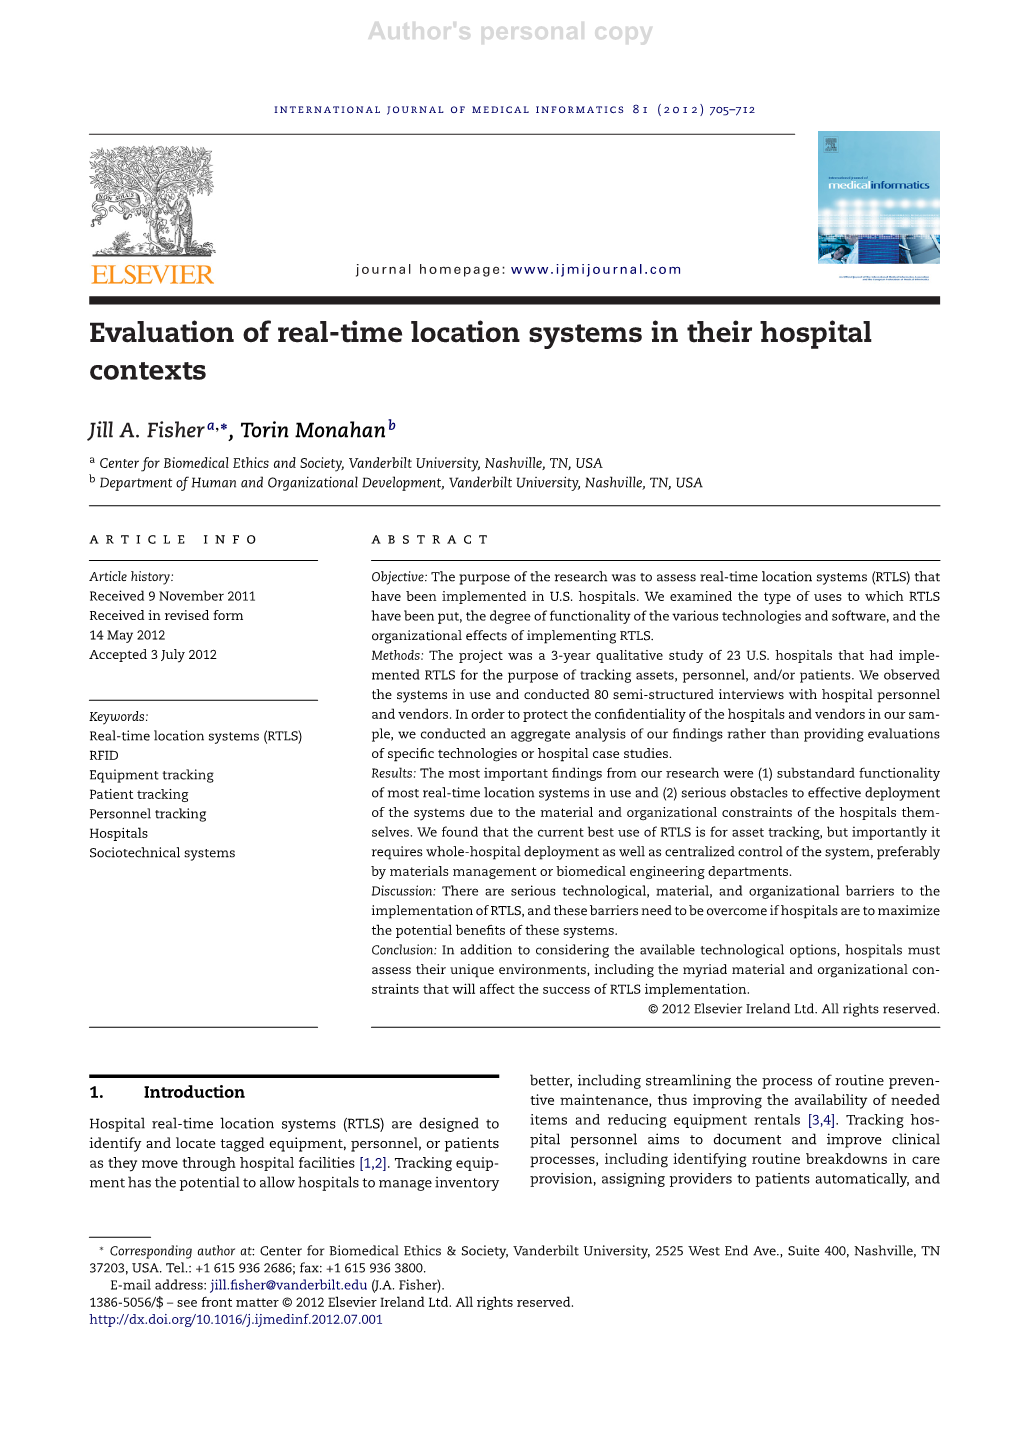 Evaluation of Real-Time Location Systems in Their Hospital Contexts